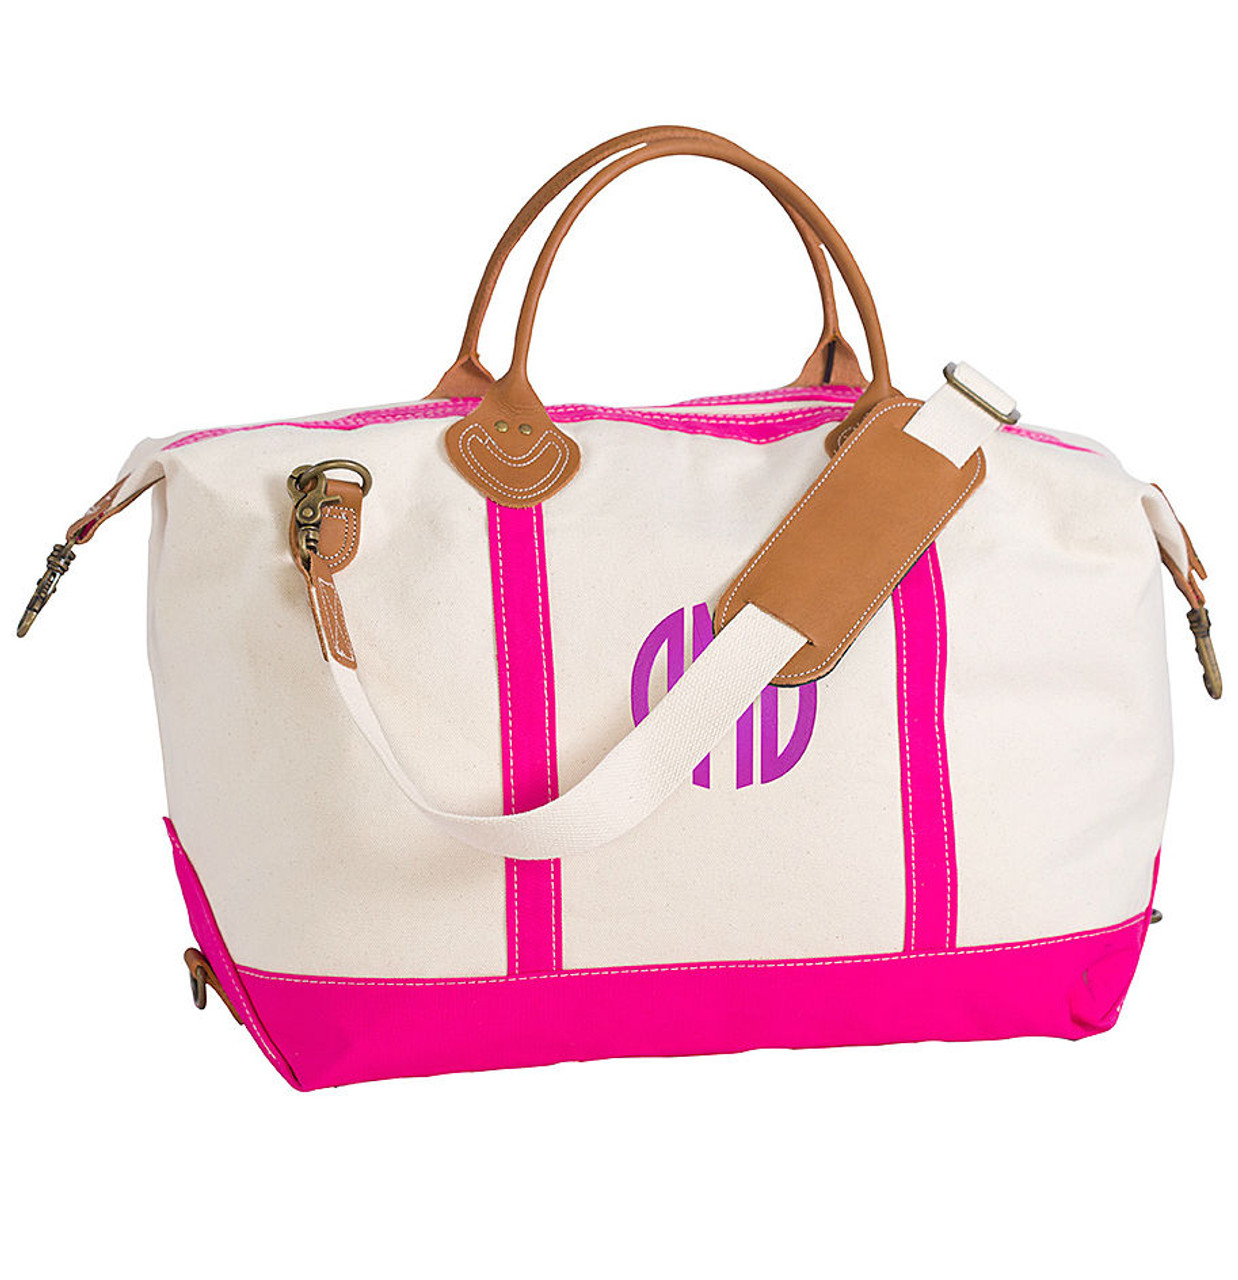 The Classic Weekender Personalized Tote Bag - Pink